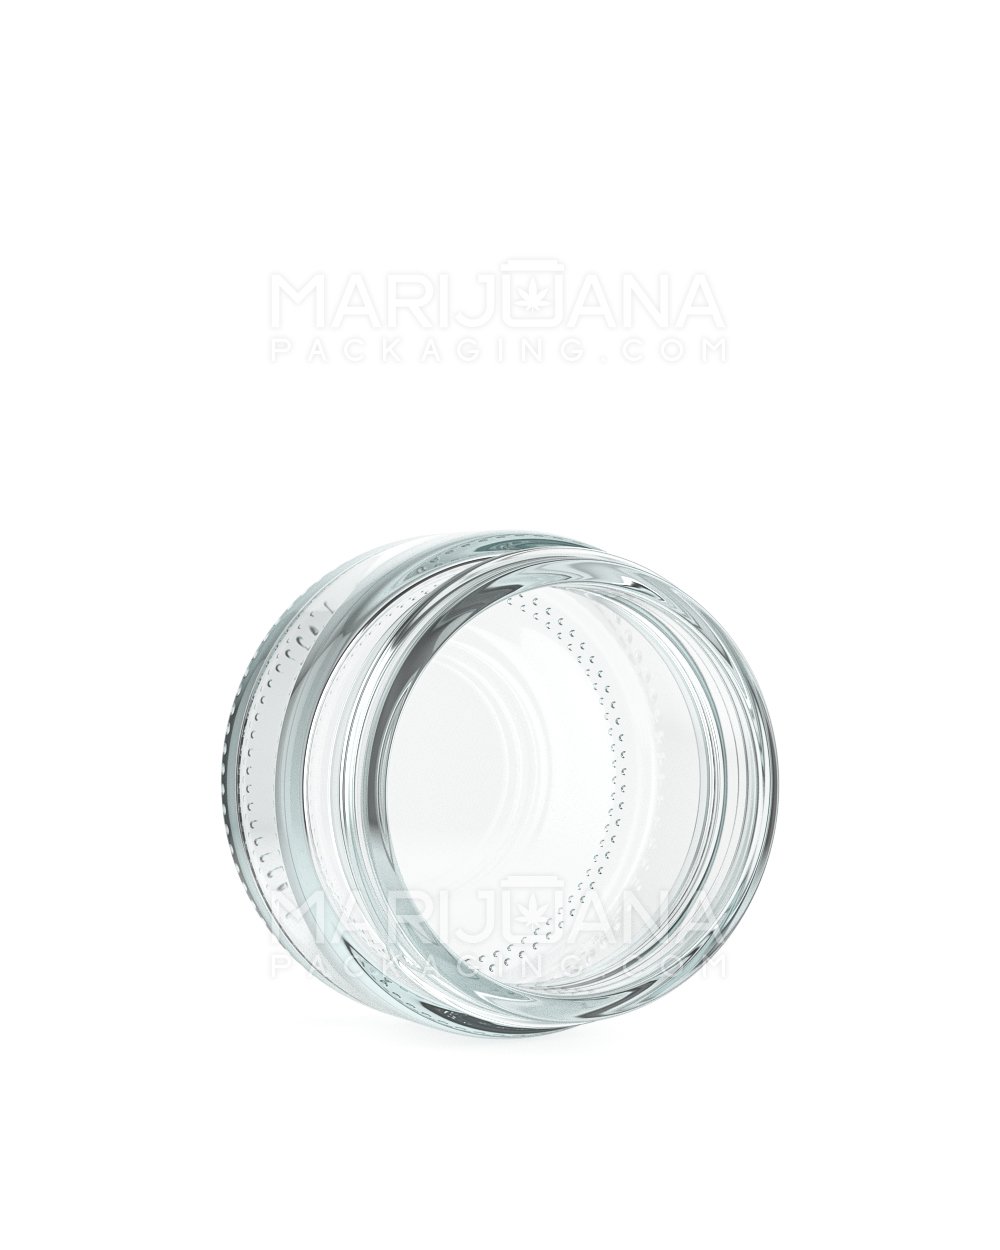 Straight Sided Clear Glass Jars | 50mm - 1oz - 200 Count - 3